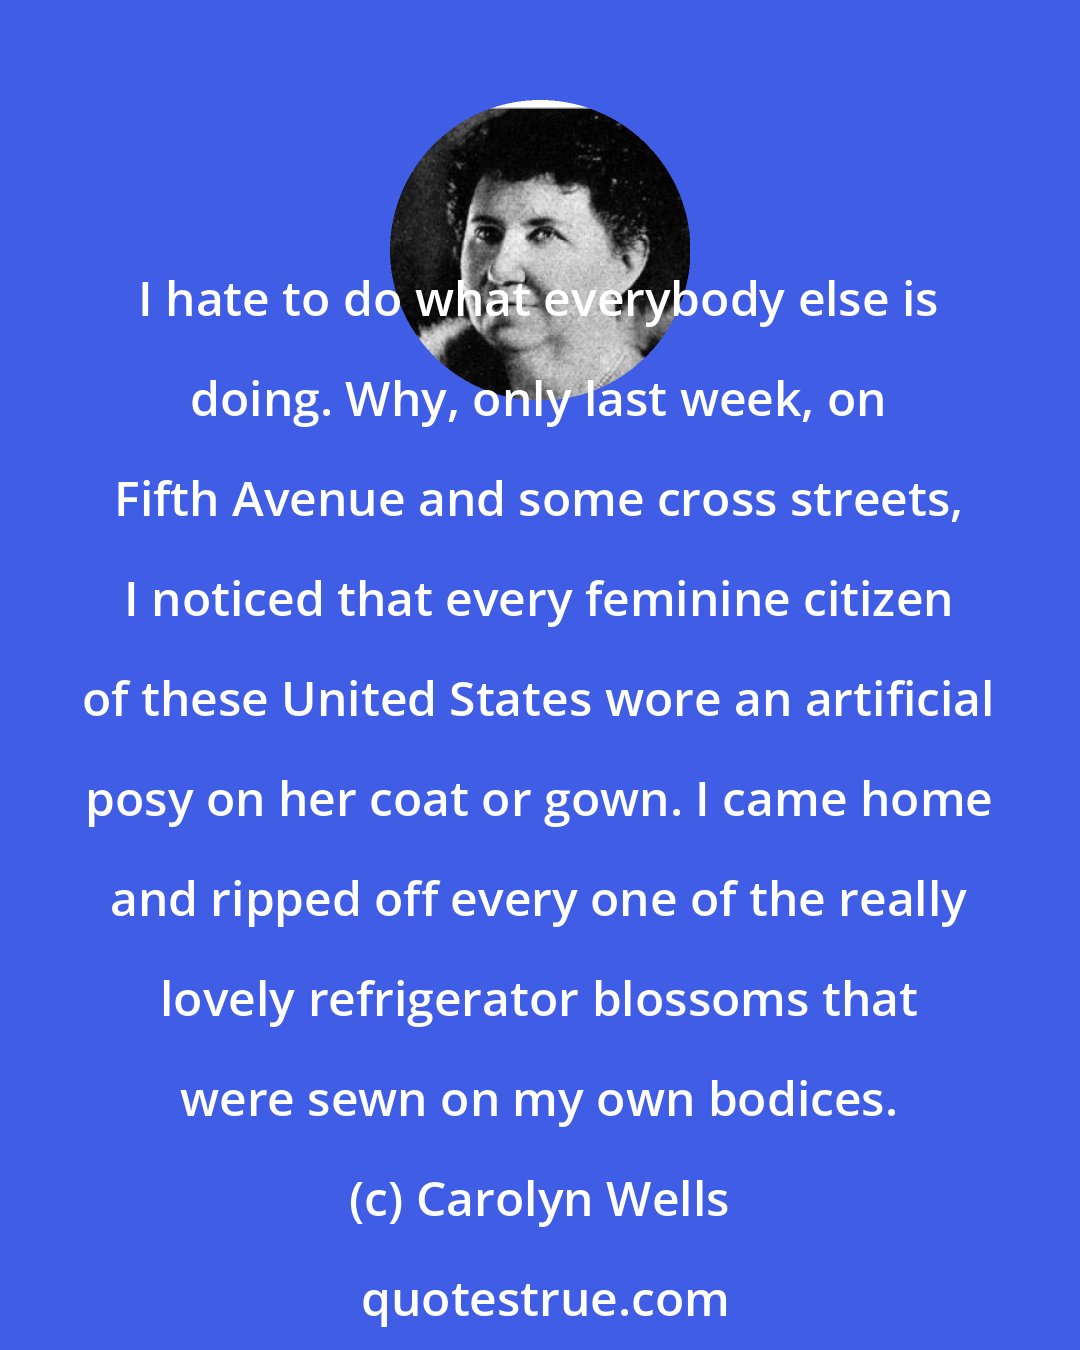 Carolyn Wells: I hate to do what everybody else is doing. Why, only last week, on Fifth Avenue and some cross streets, I noticed that every feminine citizen of these United States wore an artificial posy on her coat or gown. I came home and ripped off every one of the really lovely refrigerator blossoms that were sewn on my own bodices.